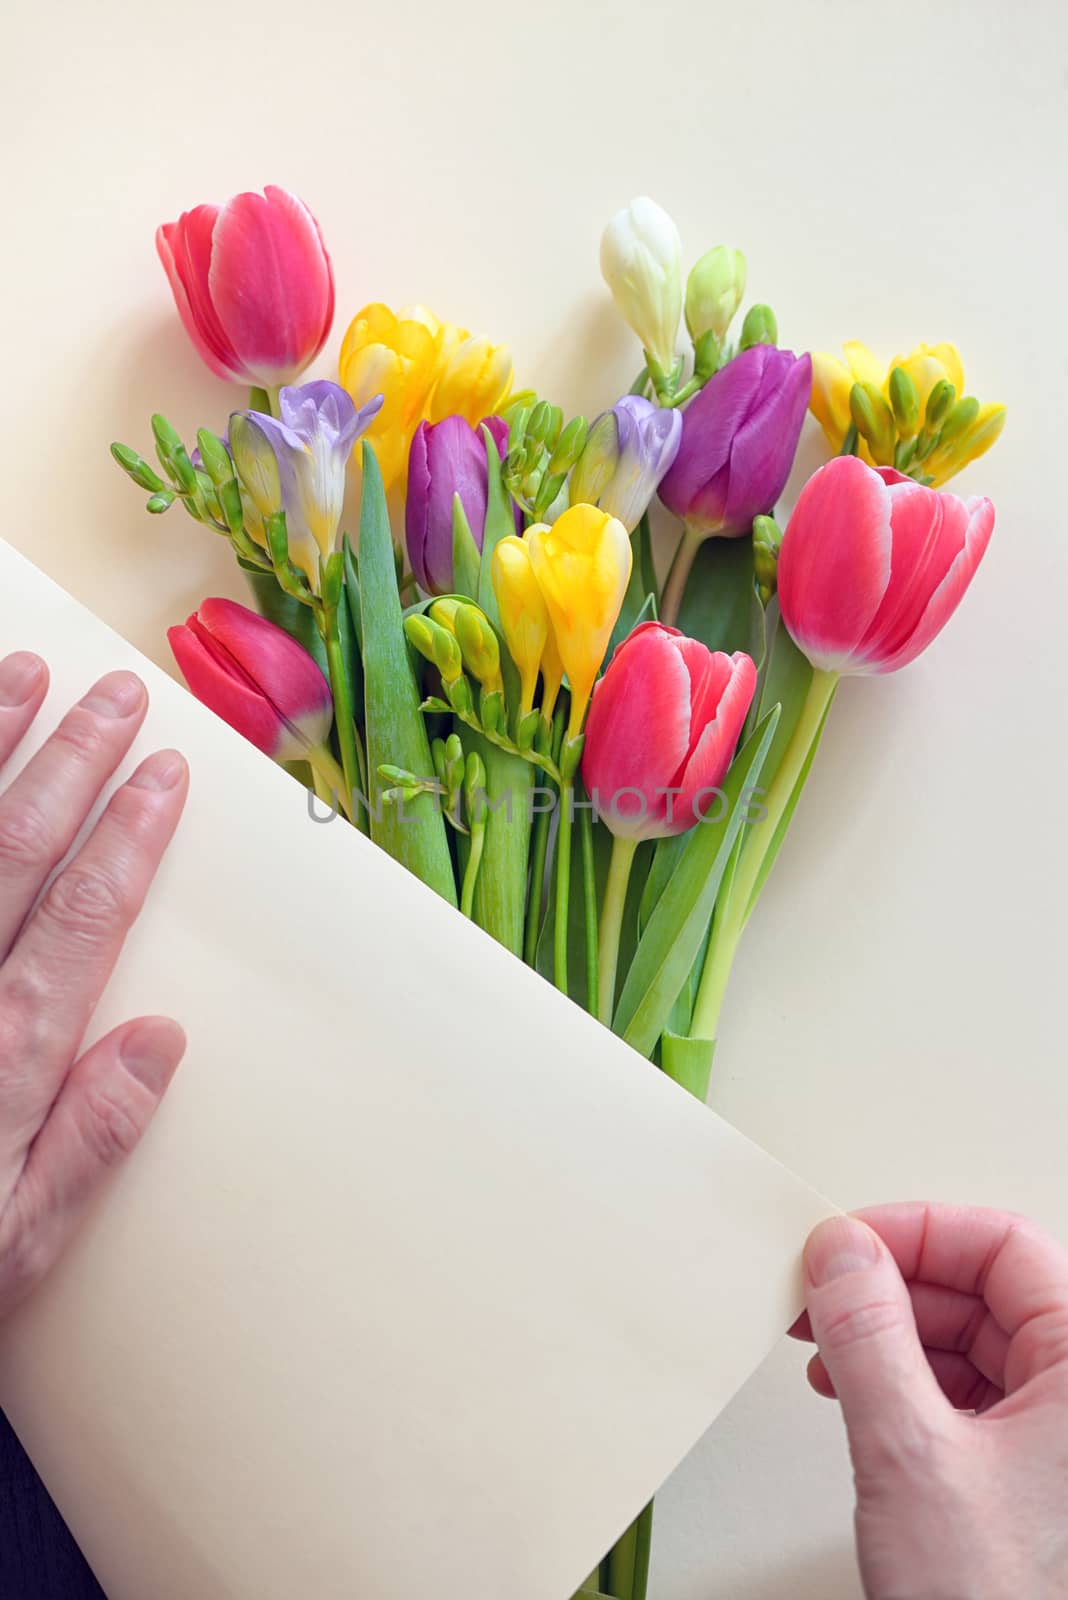 Hands and Bouquets Of Tulips and Freesia flowers